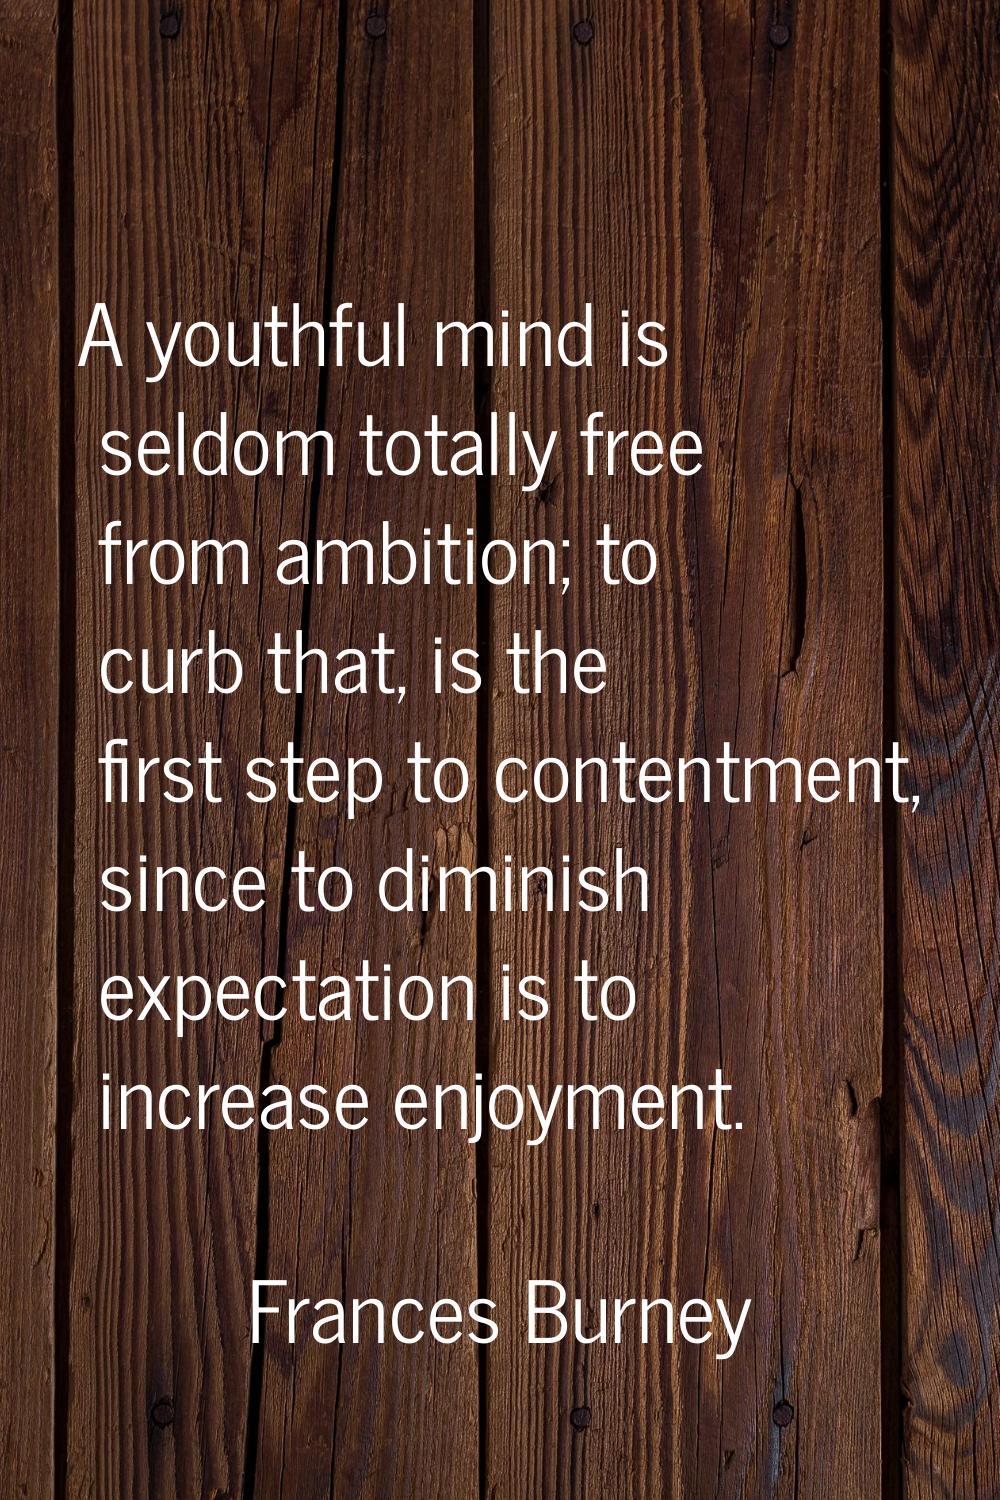 A youthful mind is seldom totally free from ambition; to curb that, is the first step to contentmen